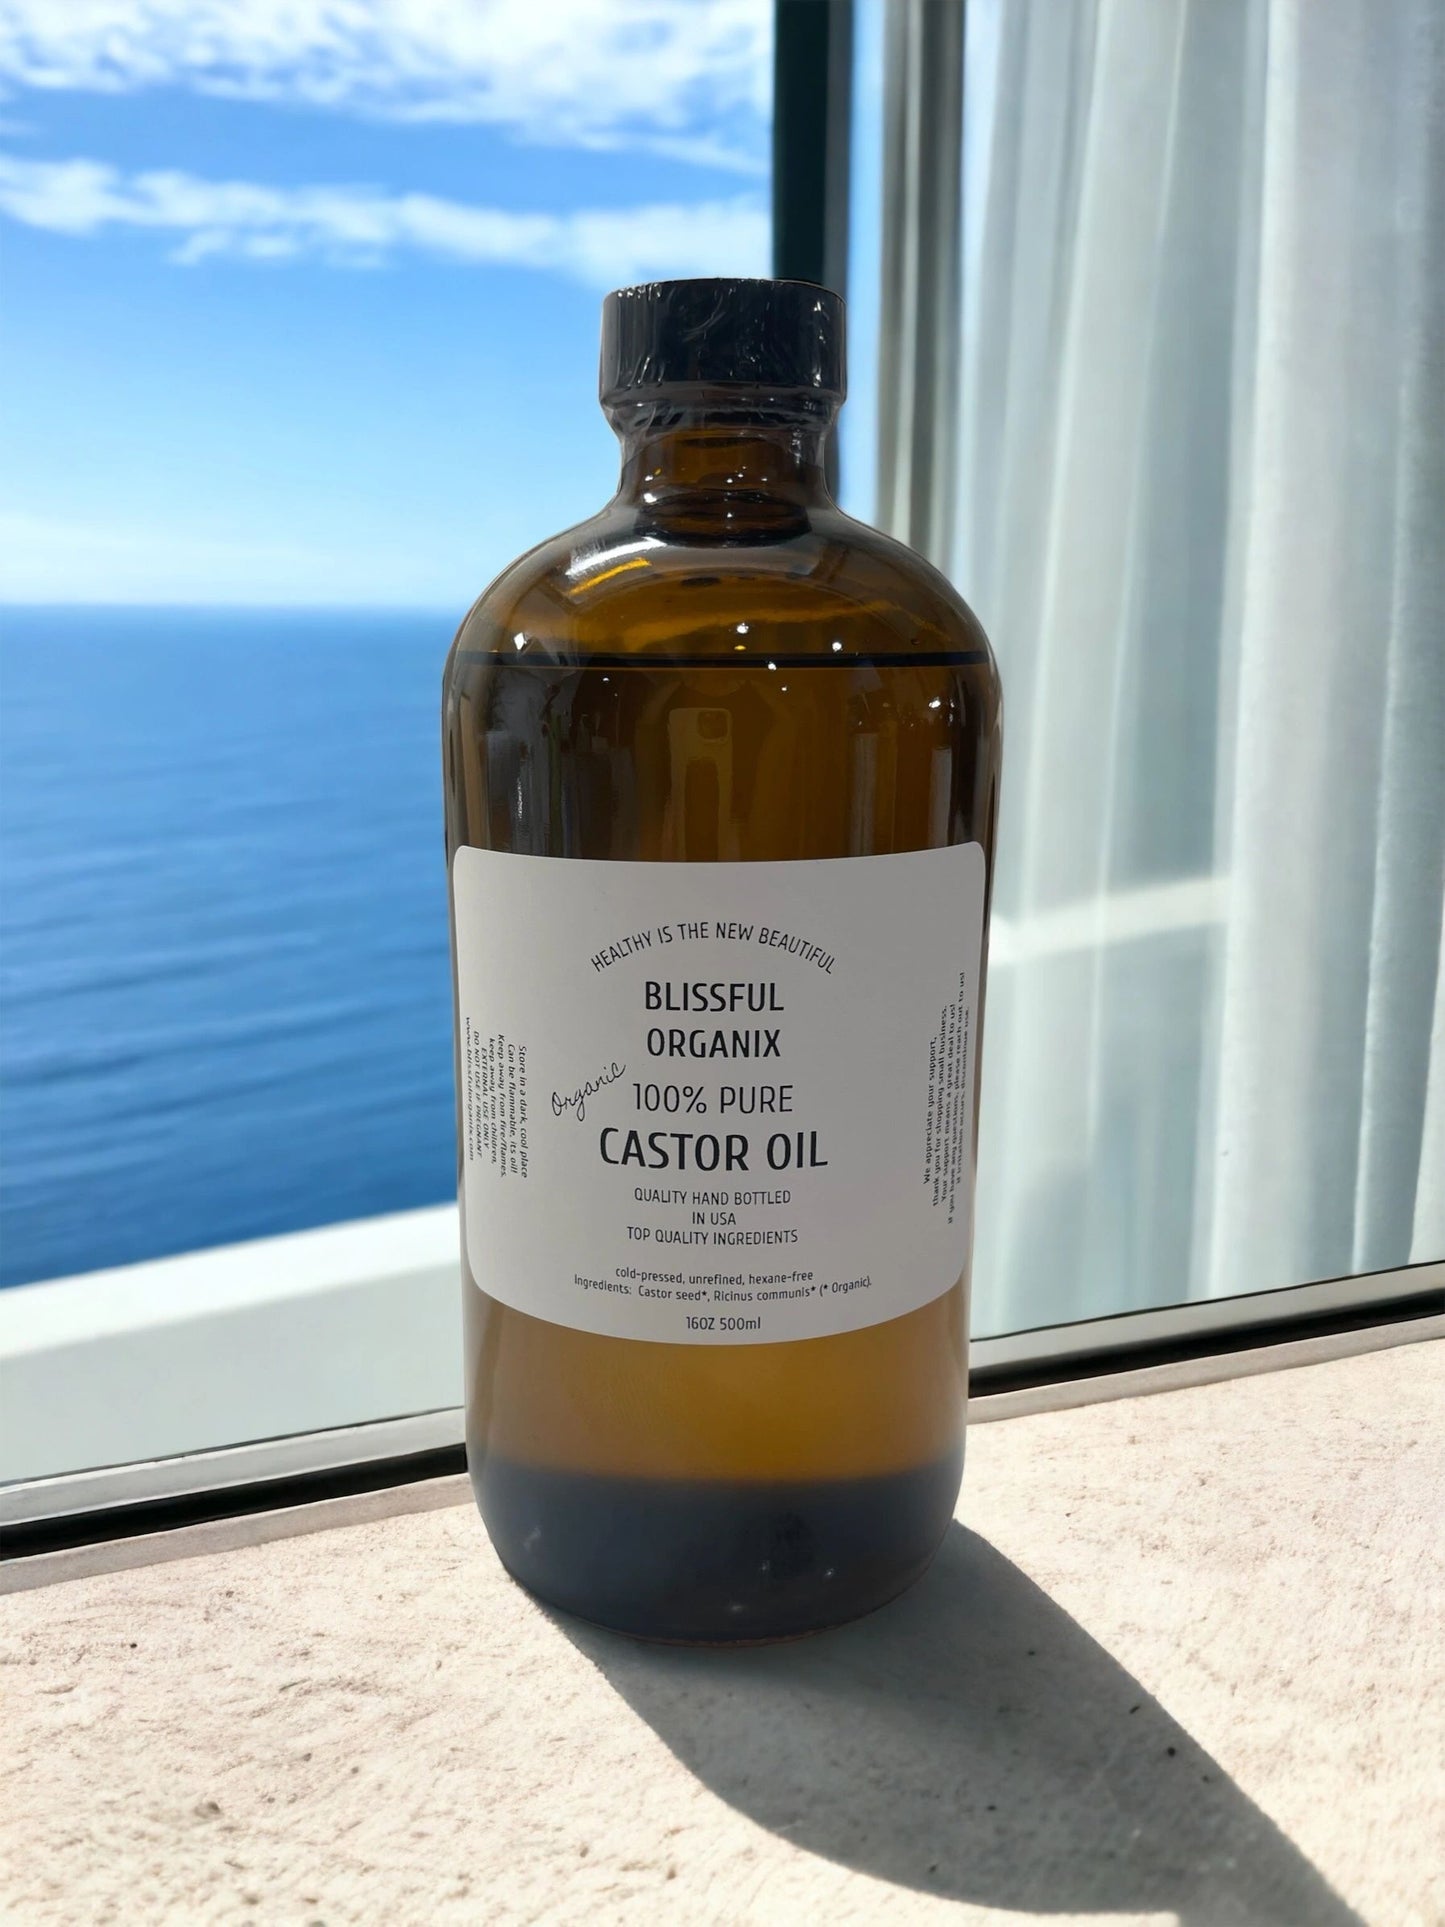 GLASS BOTTLE ORGANIC CASTOR OIL 100% NATURAL PURE COLD PRESSED HEXANE-FREE 16 OZ.